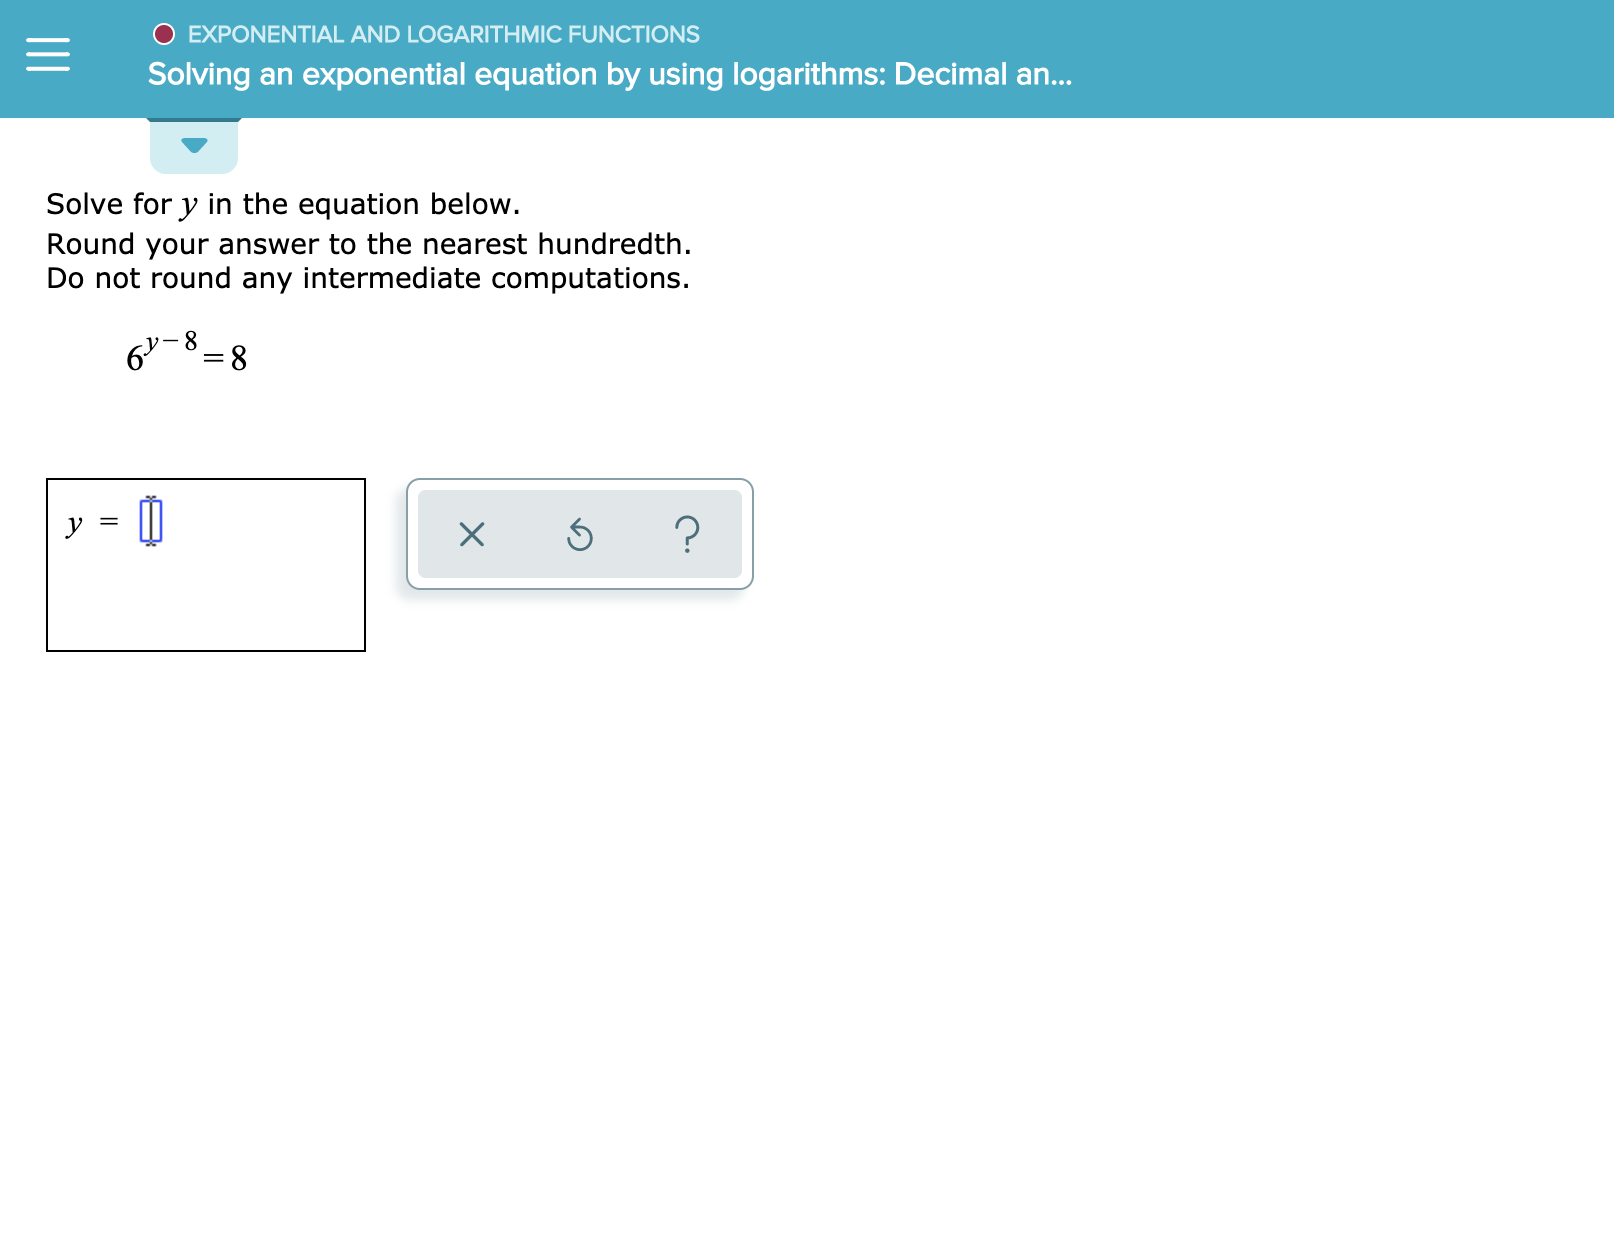 O EXPONENTIAL AND LOGARITHMIC FUNCTIONS
Solving an exponential equation by using logarithms: Decimal an...
Solve for y in the equation below.
Round your answer to the nearest hundredth.
Do not round any intermediate computations.
8
6-8
y
